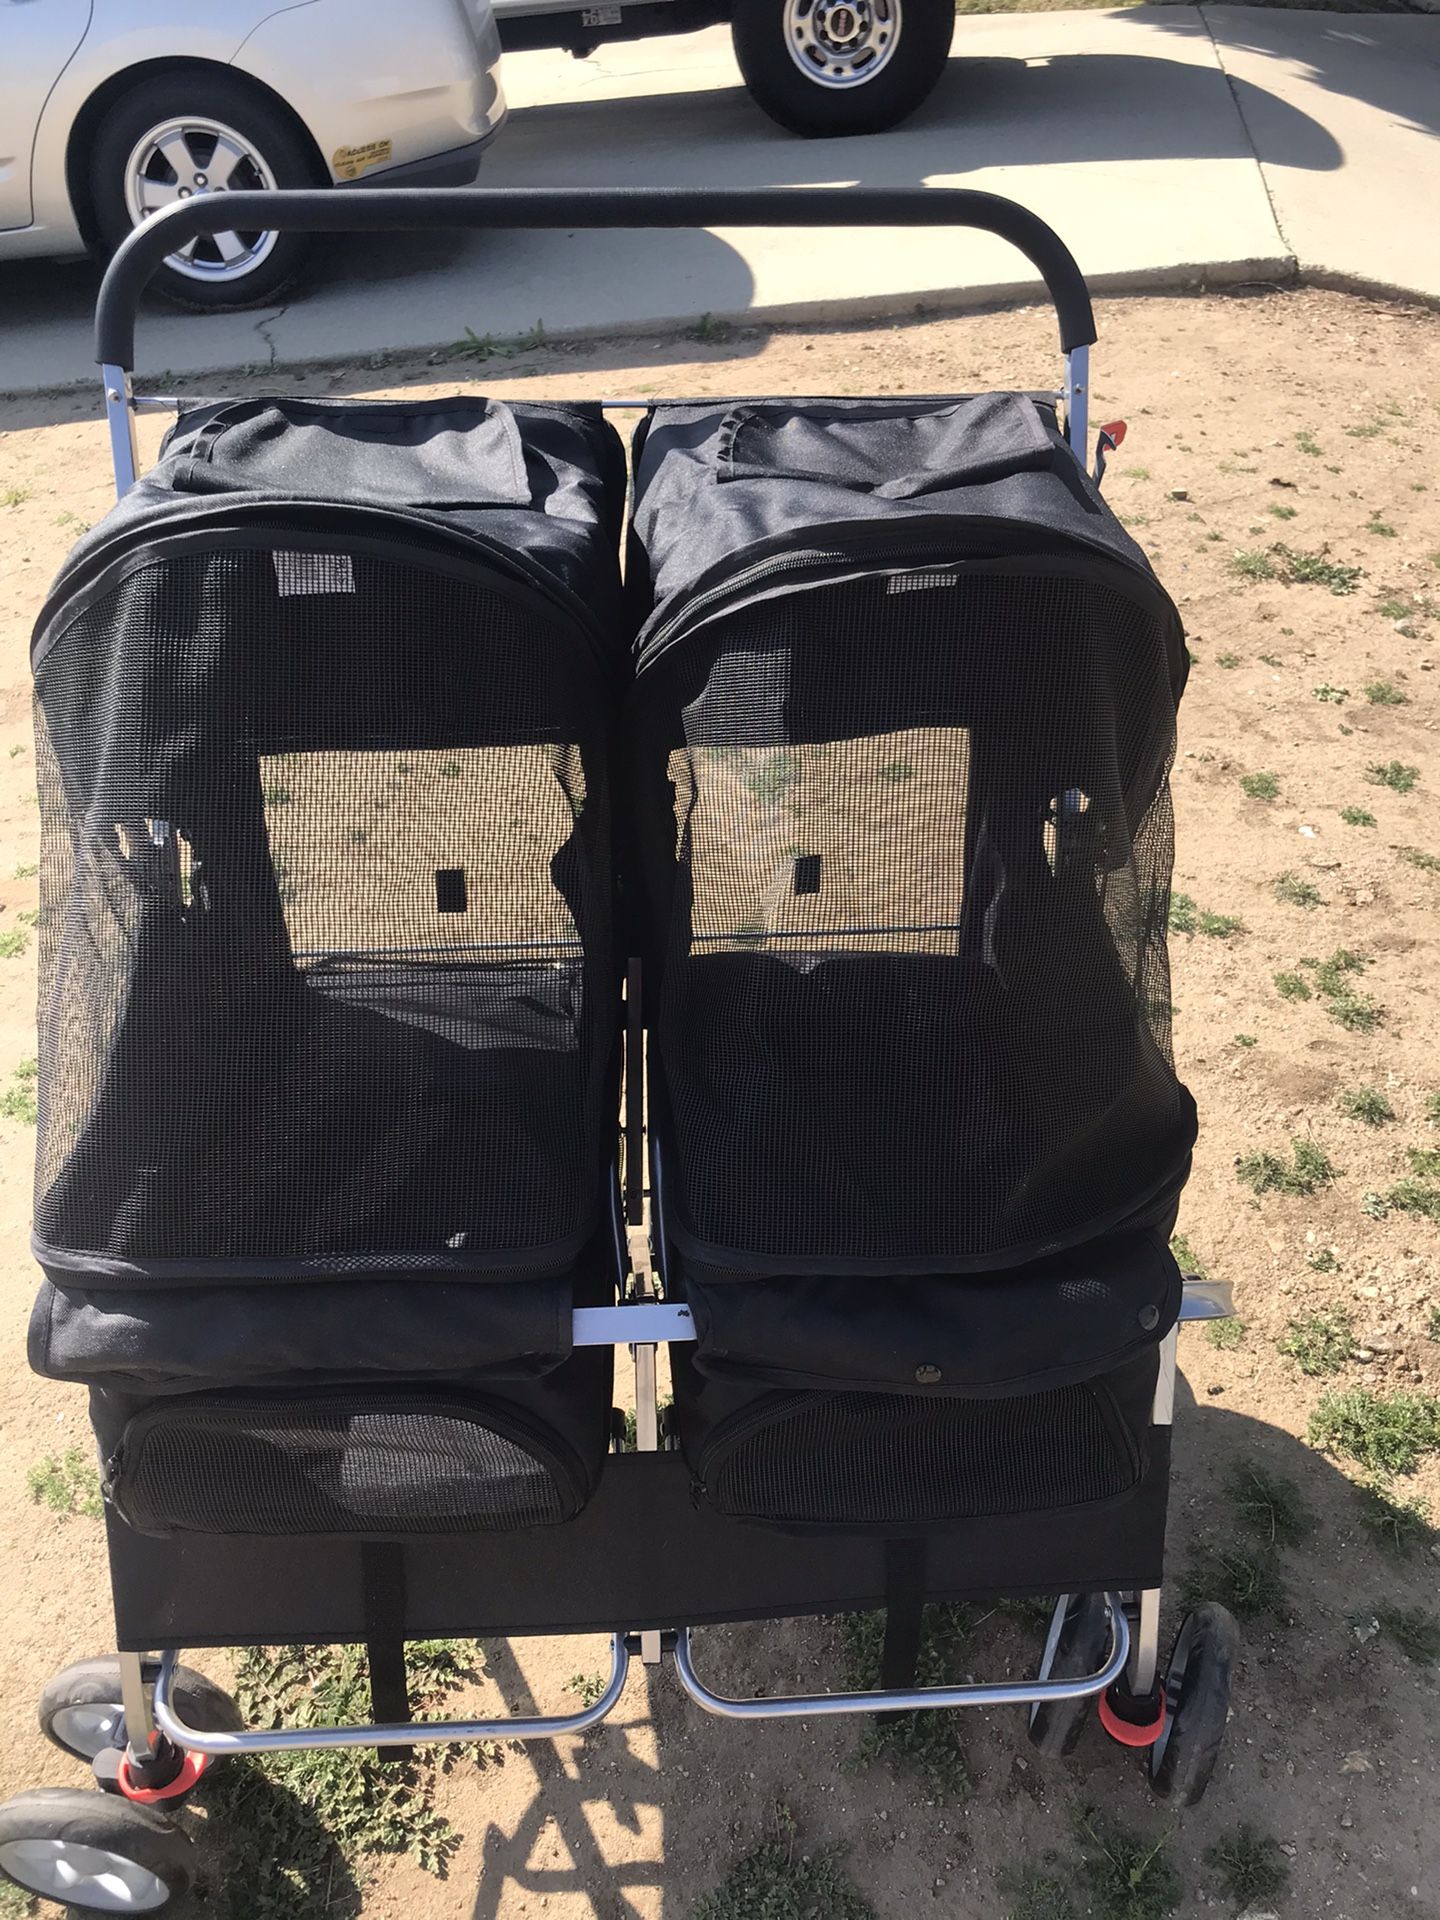 Pet stroller for two